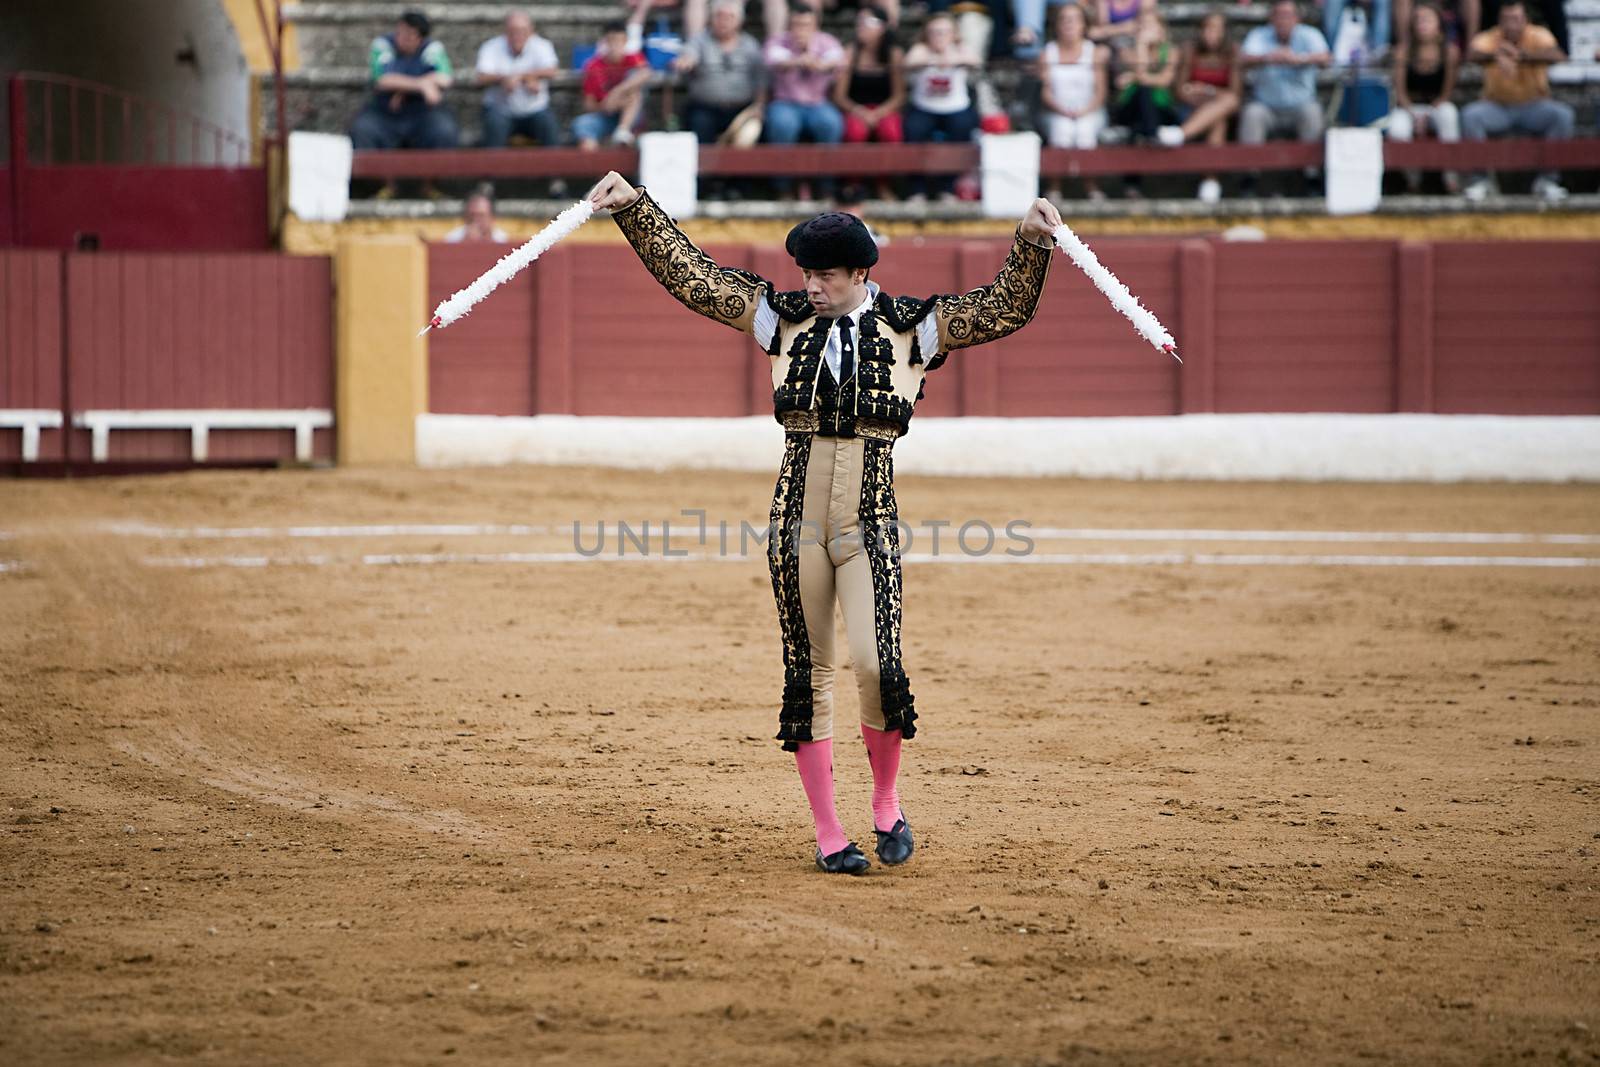 Banderillero in action, Spain by digicomphoto